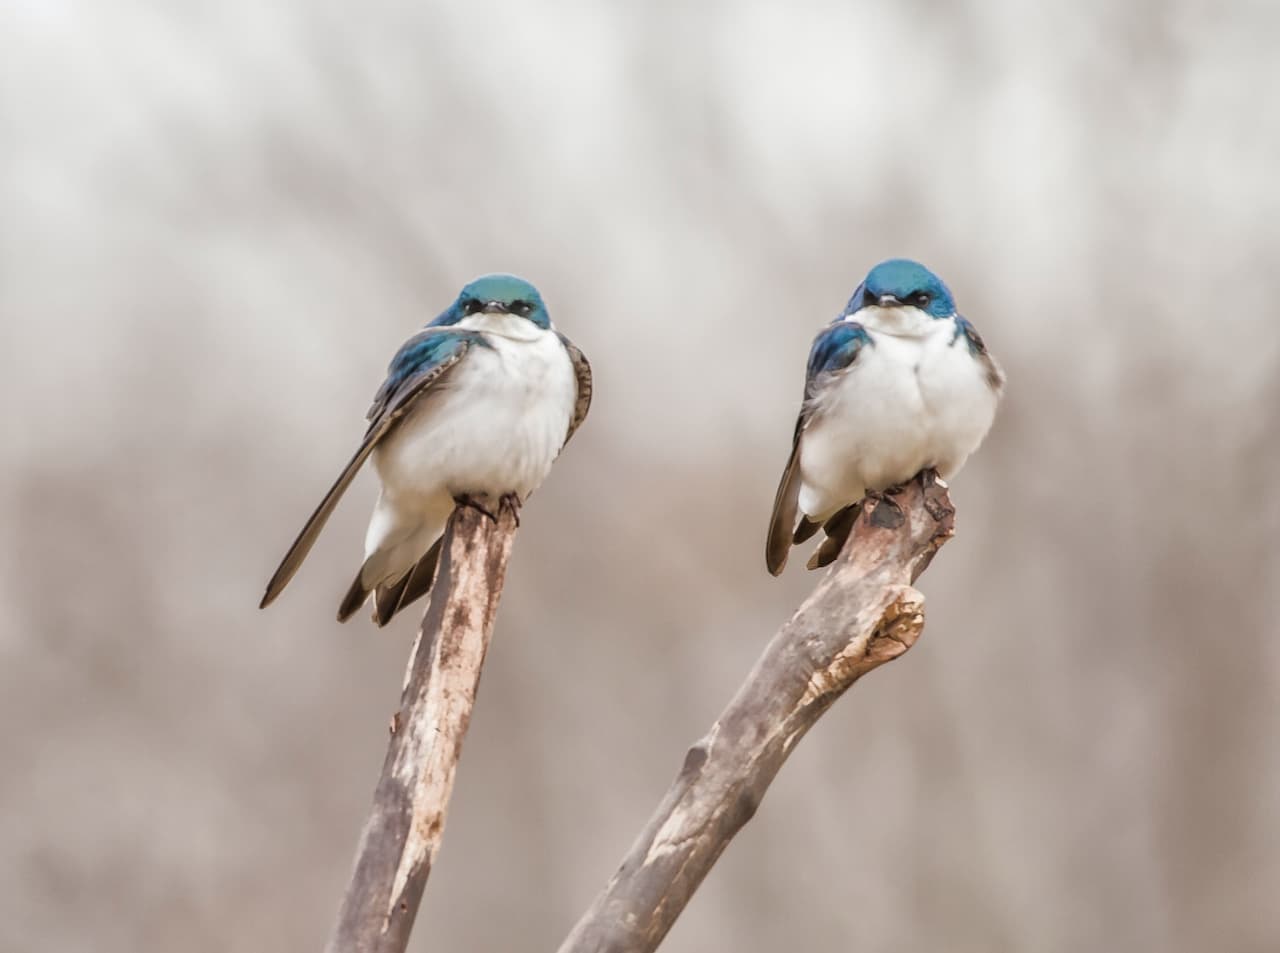 The Two Swallow Perched On The Top Of The Wood